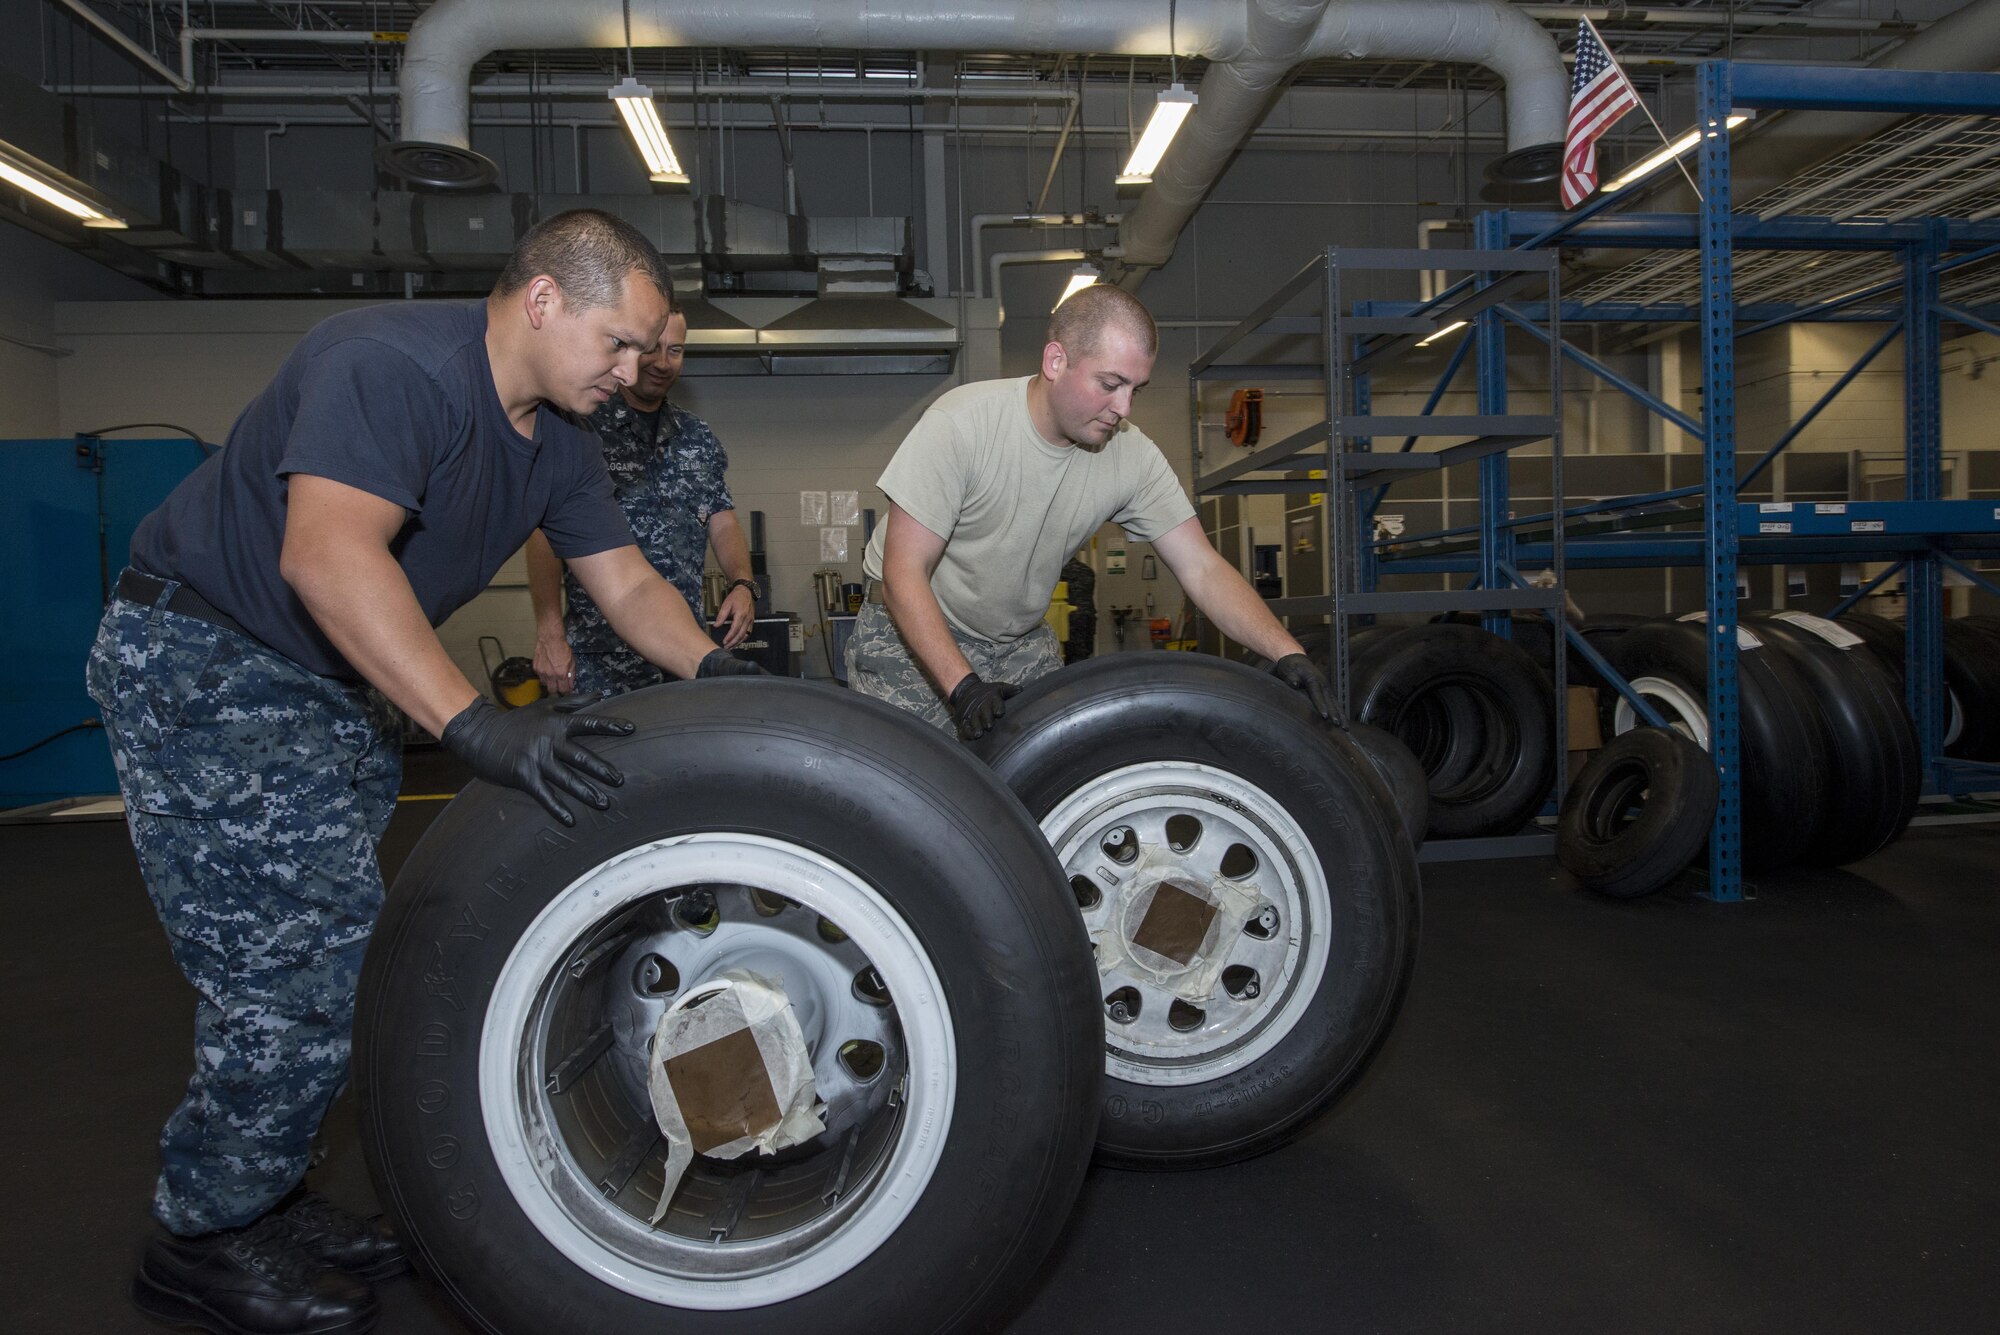 Staff Sgt. Mark Gower, 33rd Maintenance Squadron wheel and tire technician, and Petty Officer 2nd Class Carlos Mazza, 33rd MXS aviation structural mechanic roll used F-35 tires into the 33 rd MXS Wheel and Tire Shop June 9, 2016. The F-35 Wheel and Tire Shop at Eglin AFB is the only wheel and tire shop in the F-35 program that is integrated with both Air Force and Navy personnel. (U.S. Air Force photo by Senior Airman Stormy Archer/Released)